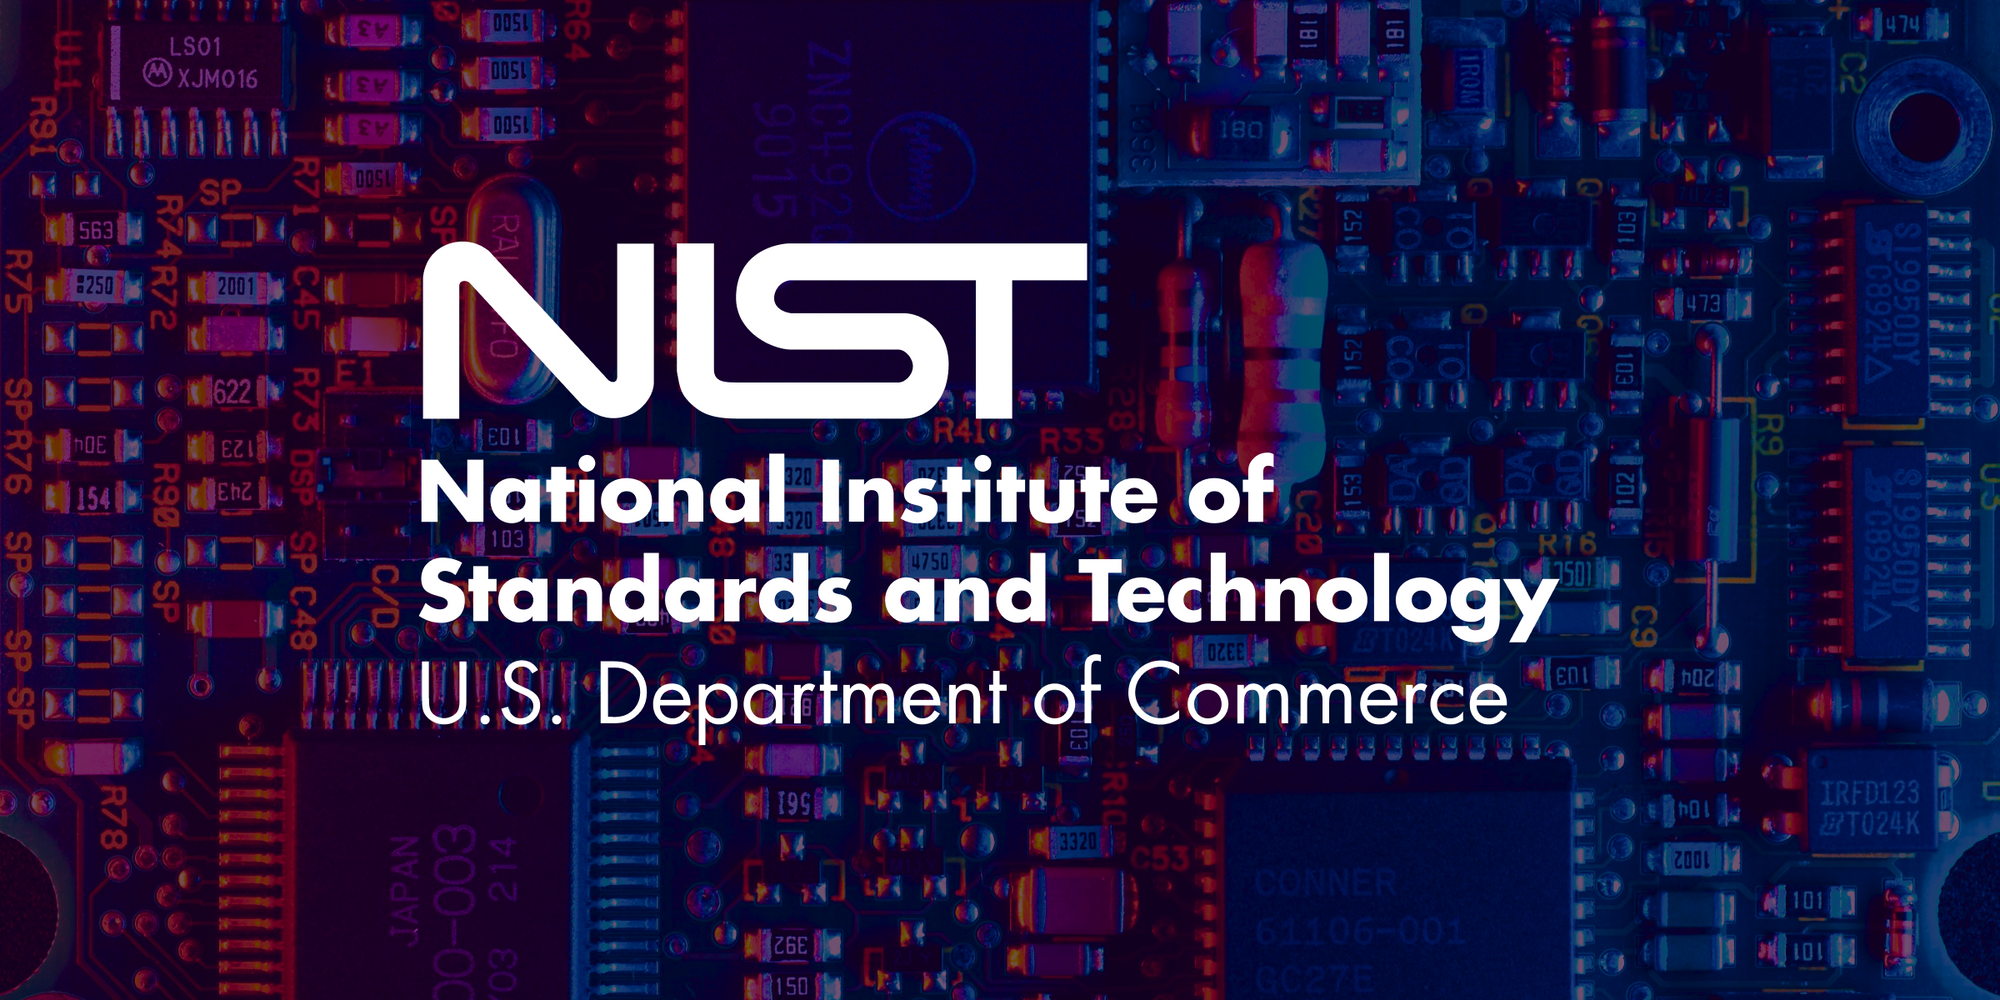 Highlights from NIST SP 800-161r1: Cybersecurity Supply Chain Risk Management